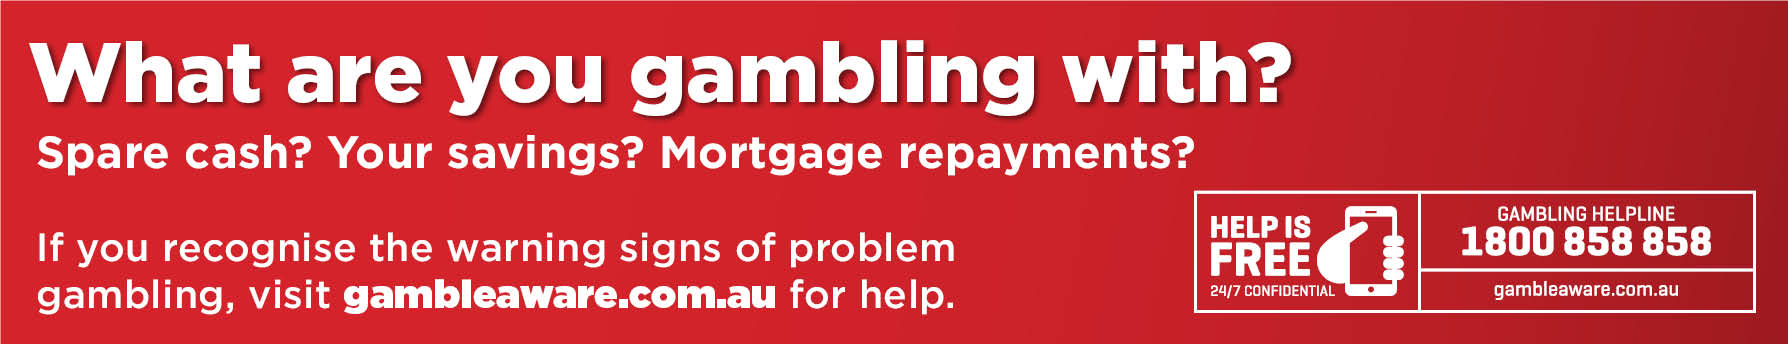 Visit gambleaware.com.au Banner image with the text: What are you gambling with? Spare cash? Your savings. Mortgage repayments. If you recognise the warning signs of problem gambling, visit gambleaware.com.au for help.